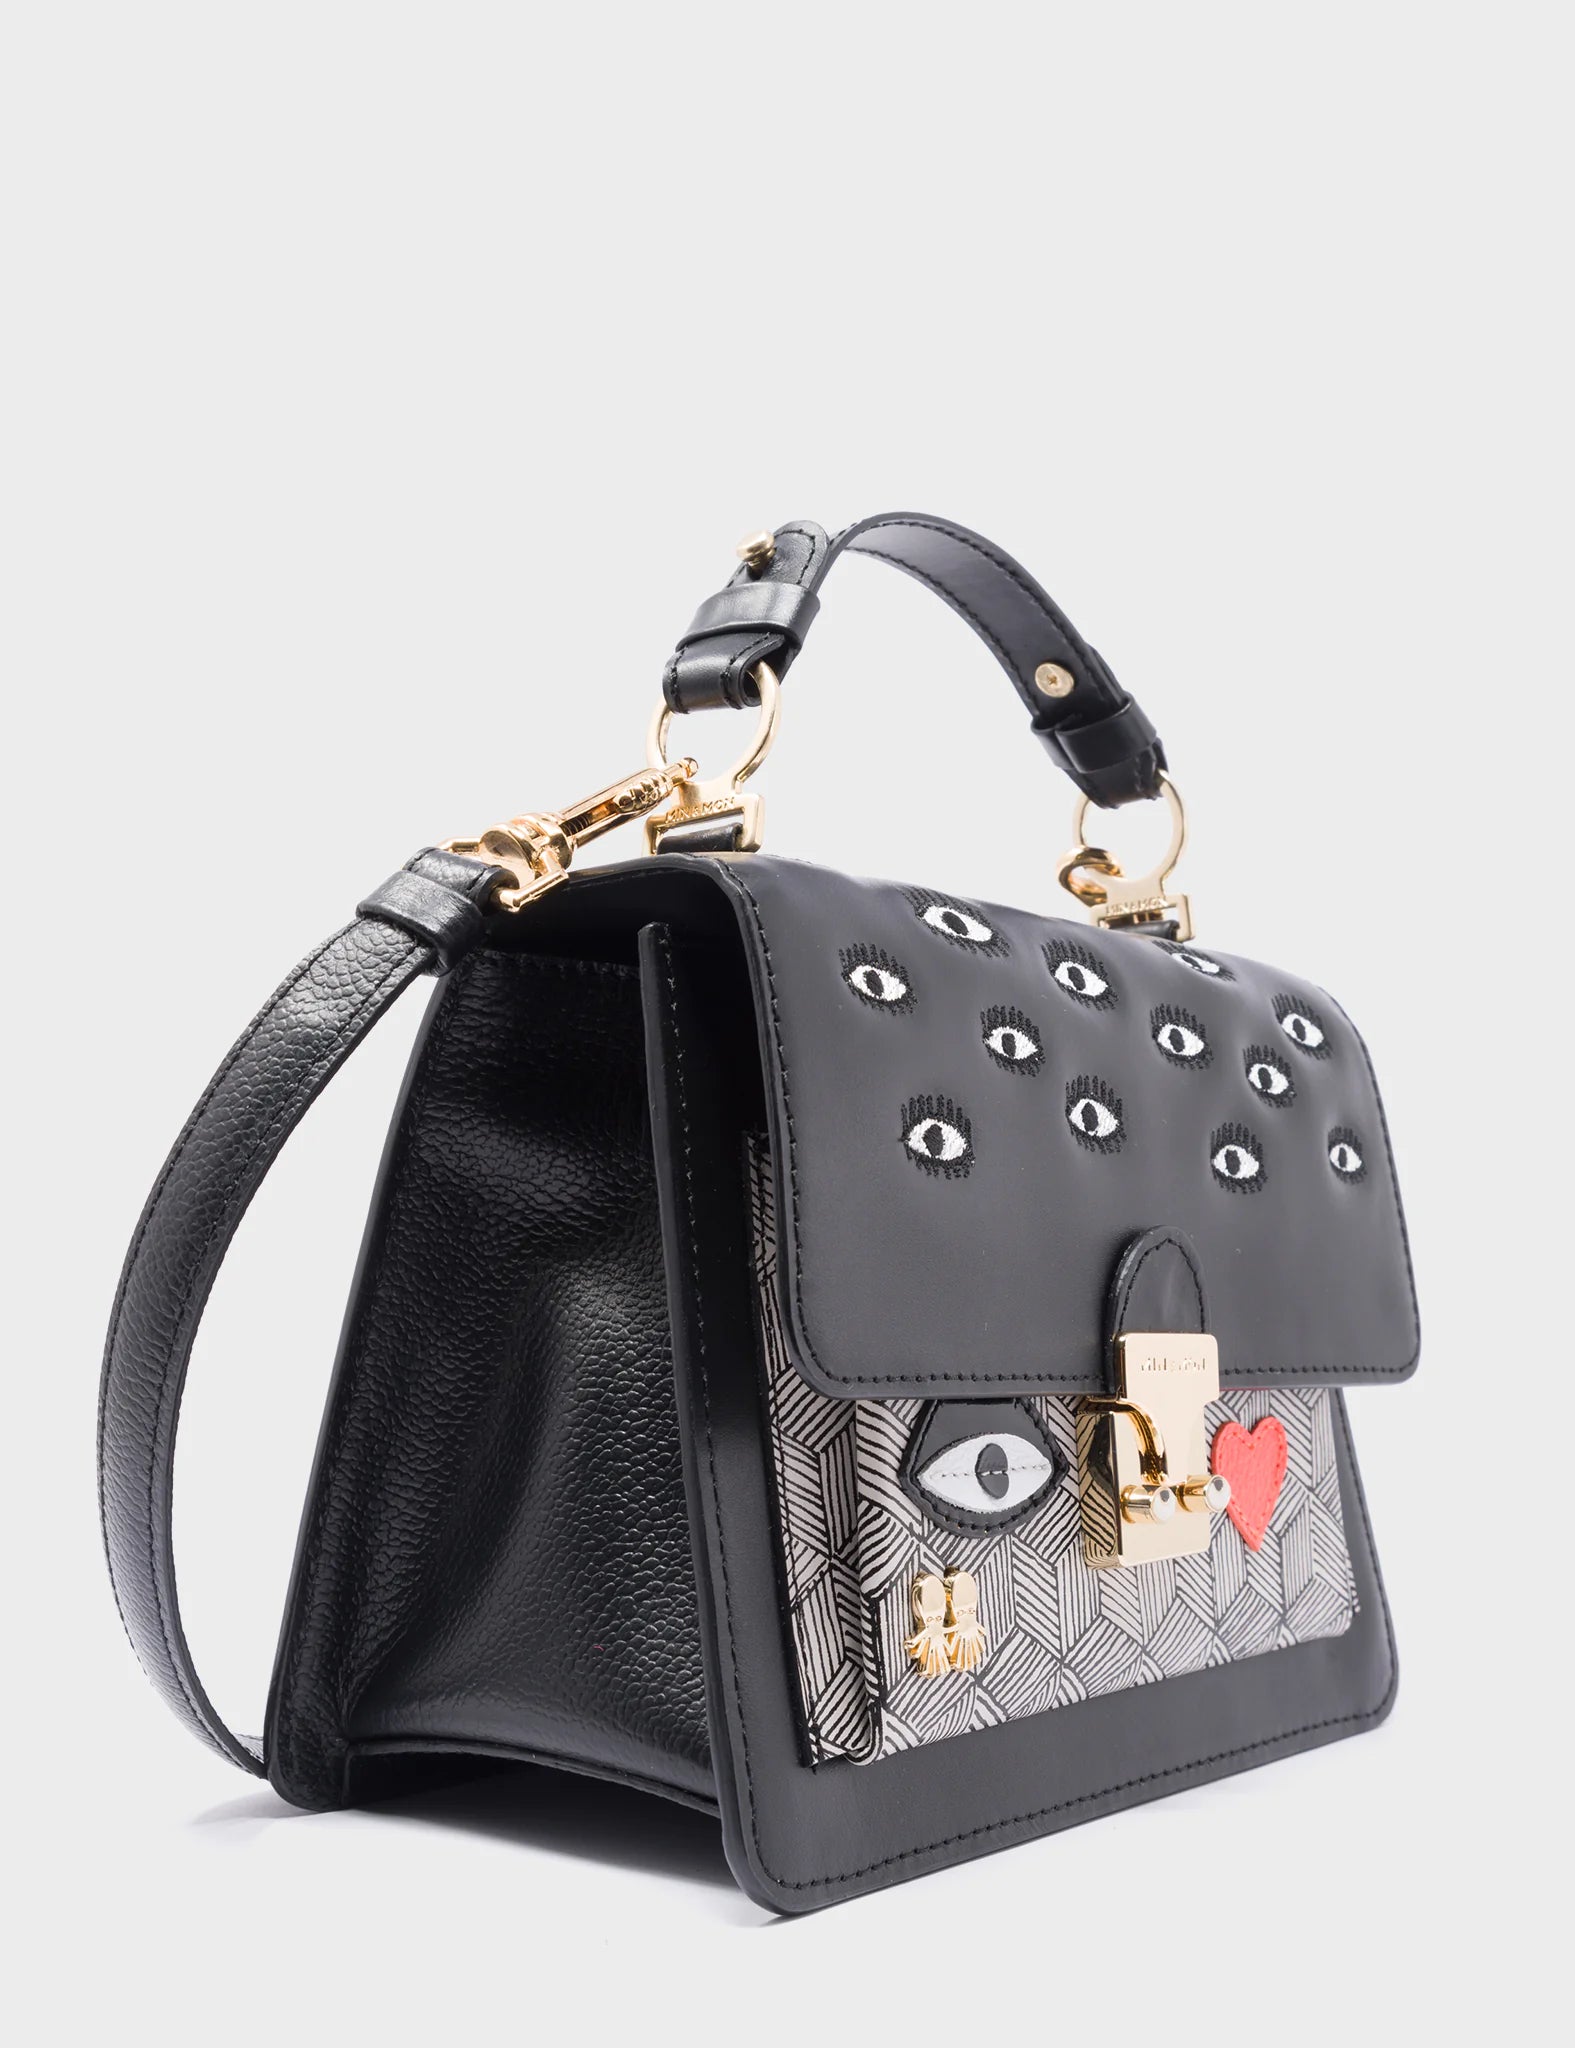 Silas Black Small Leather Crossbody Bag - Eyes Embroidery - Side detail 